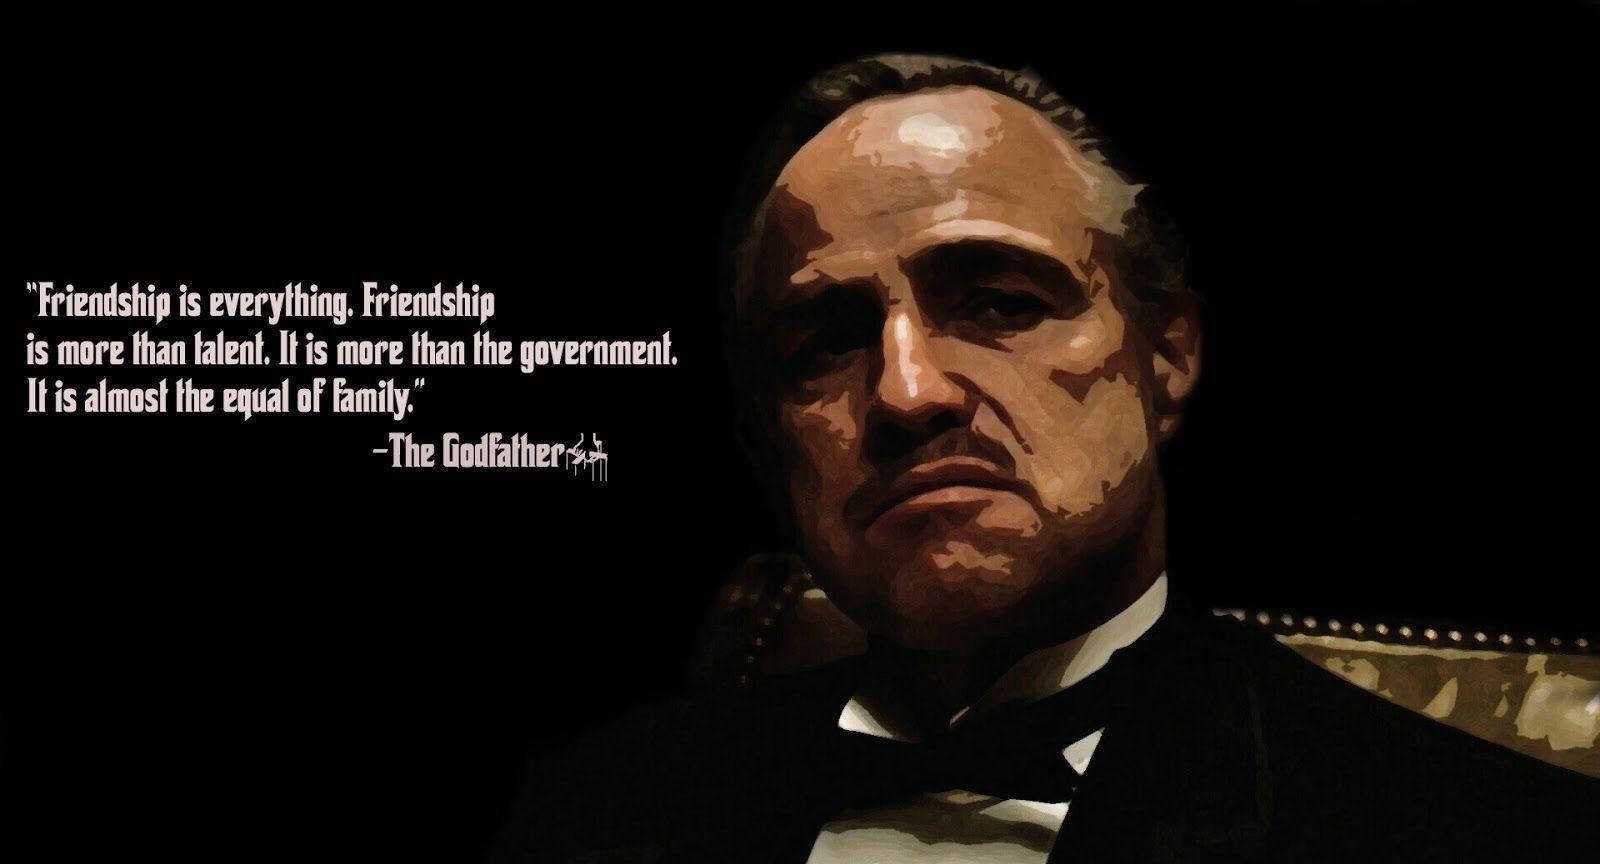 The Godfather Quotes Wallpaper